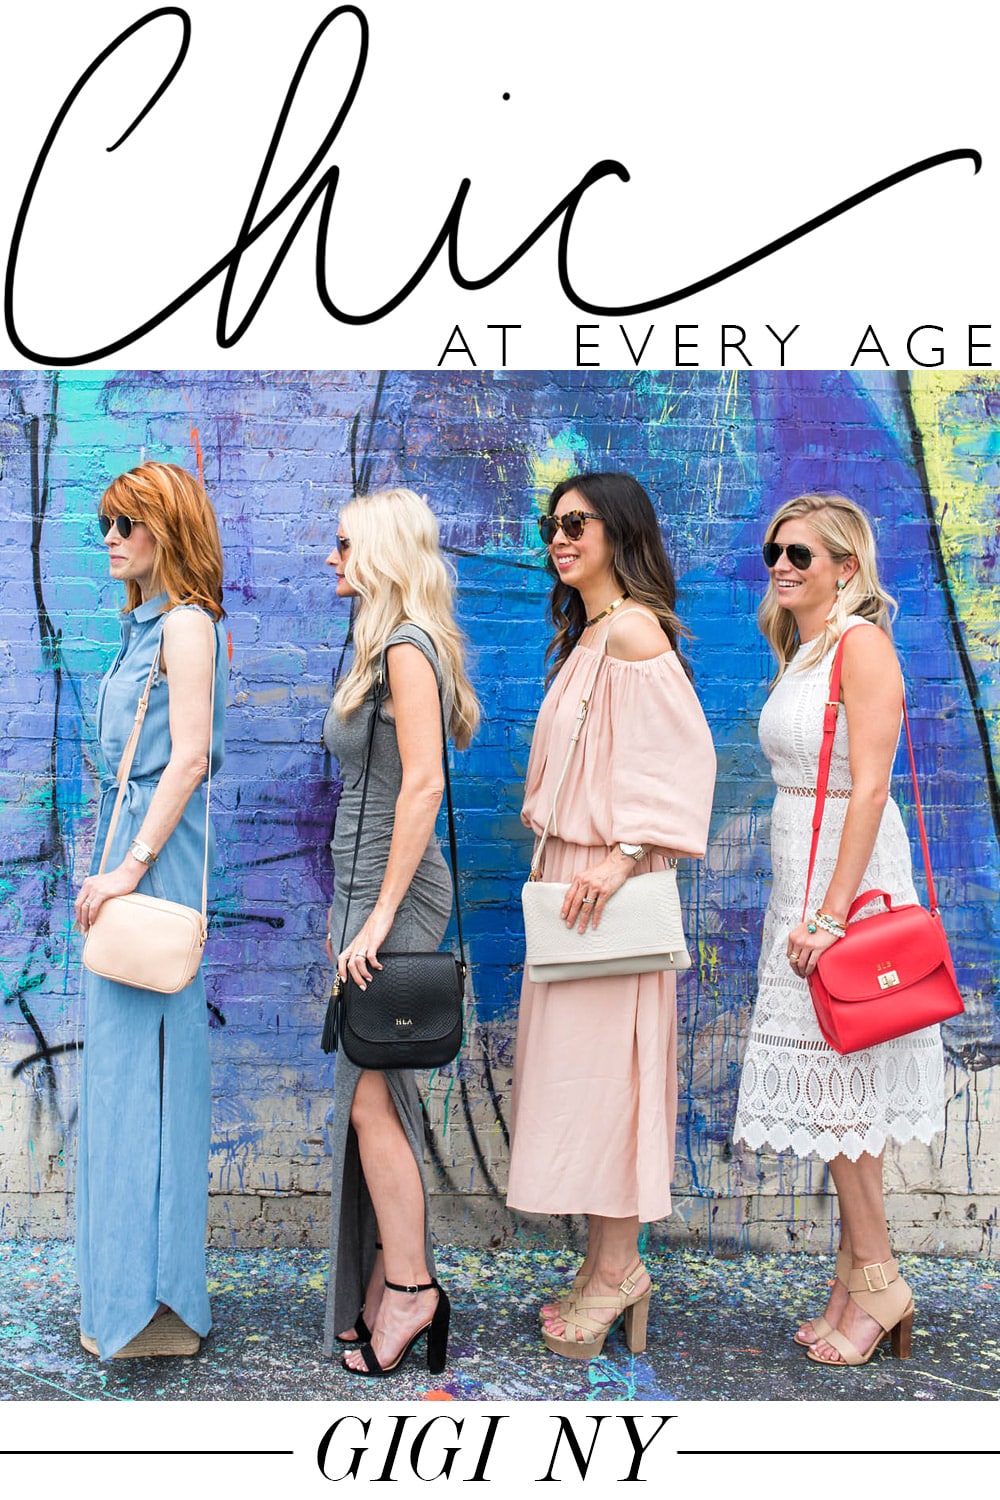 chic at every age, four bloggers wearing gigi ny crossbody bags